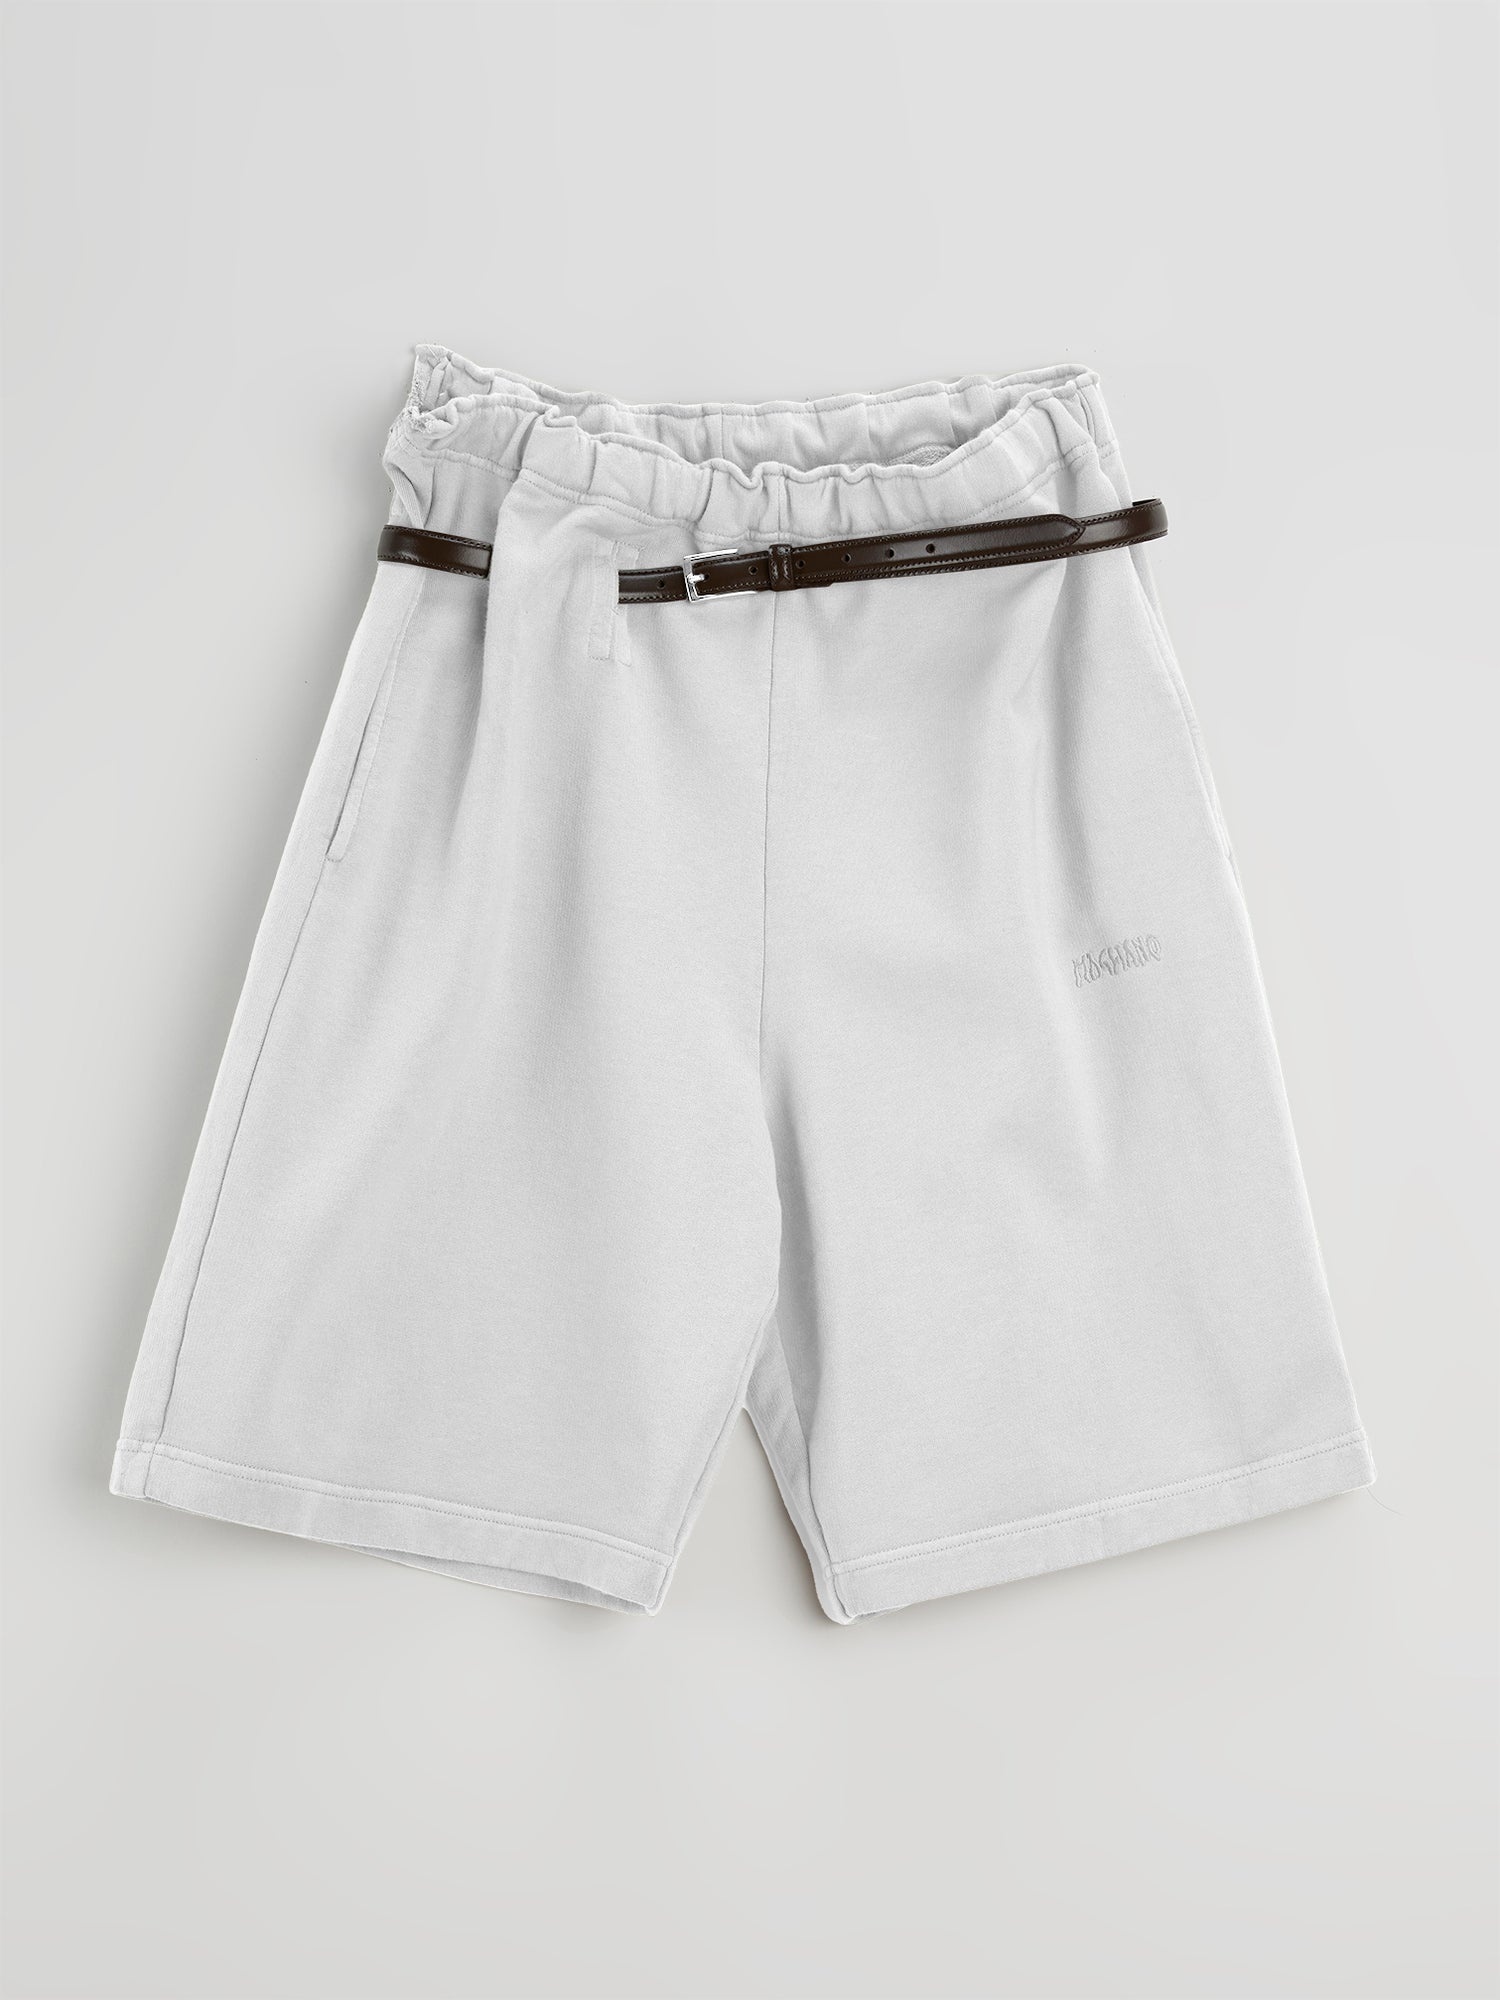 Provincia Athletic Shorts Tooth White - 1